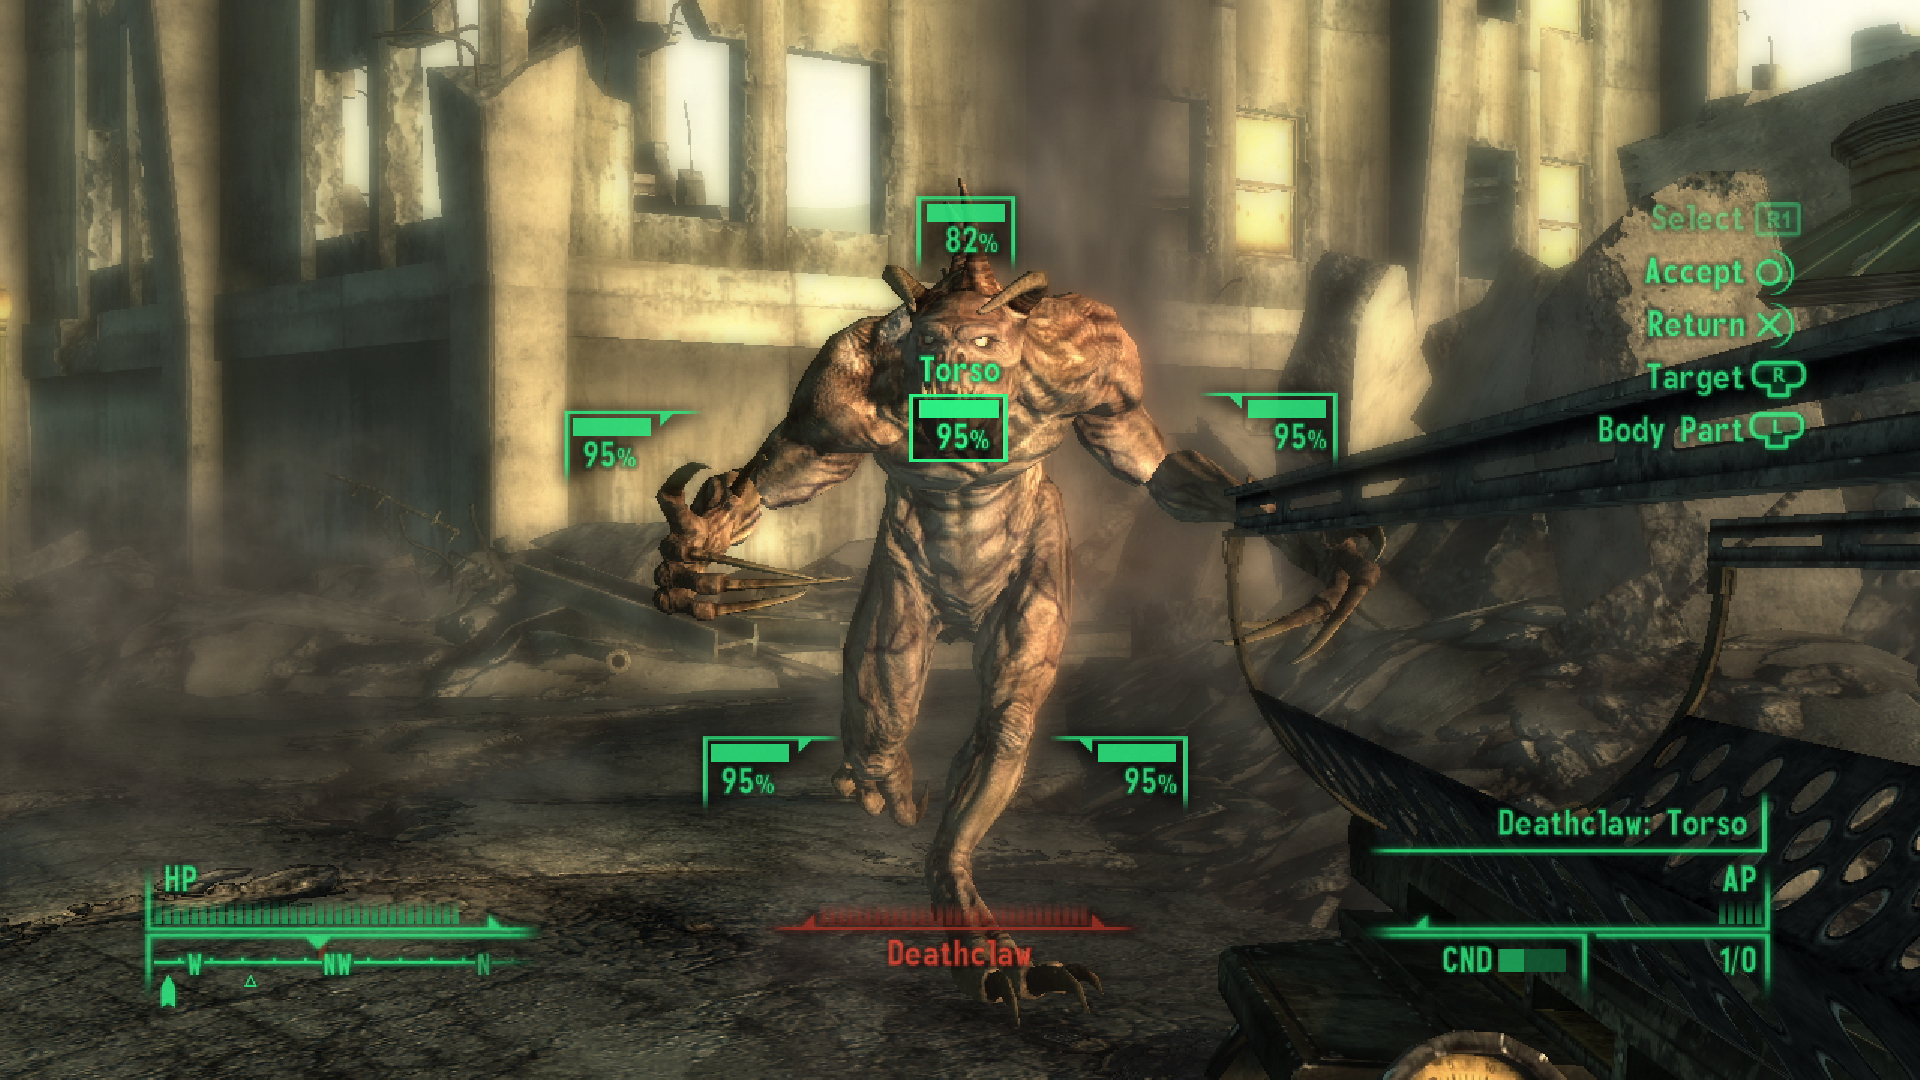 amazon, prime video’s ‘fallout’ series got me back into ‘fallout 3’ on ps3, and it’s like i never left